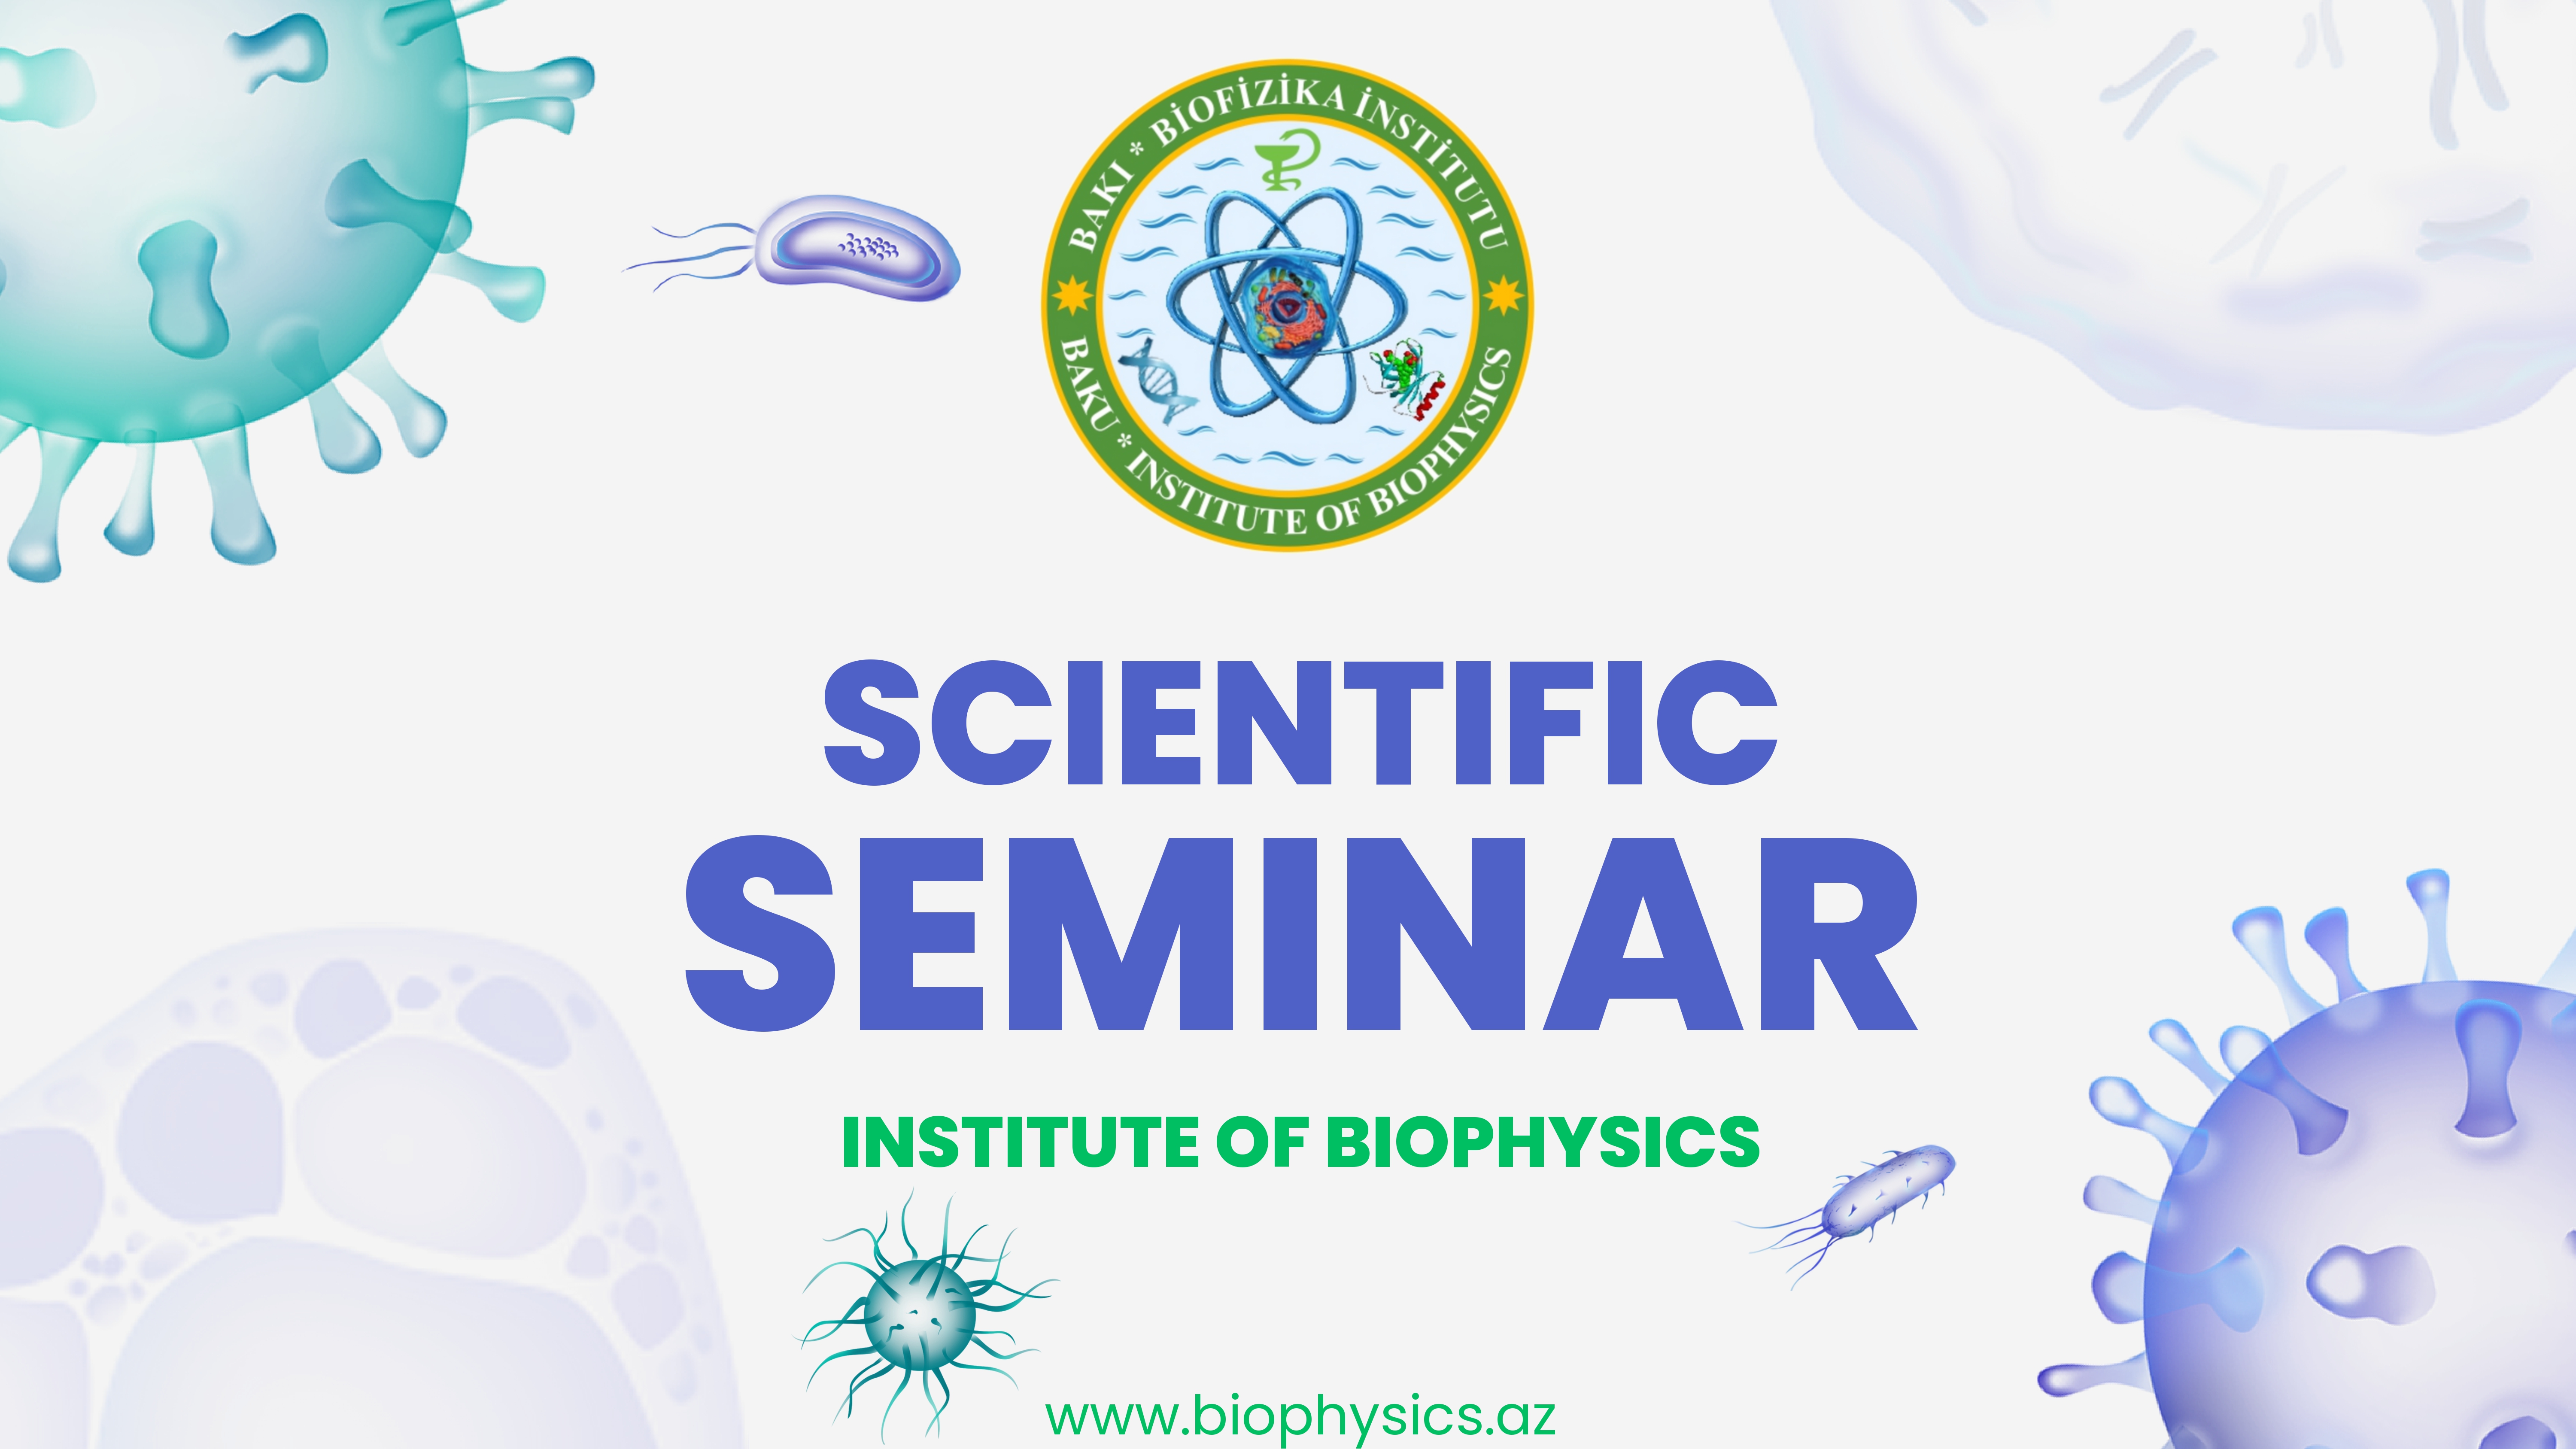 A scientific seminar will be held at the Institute of Biophysics